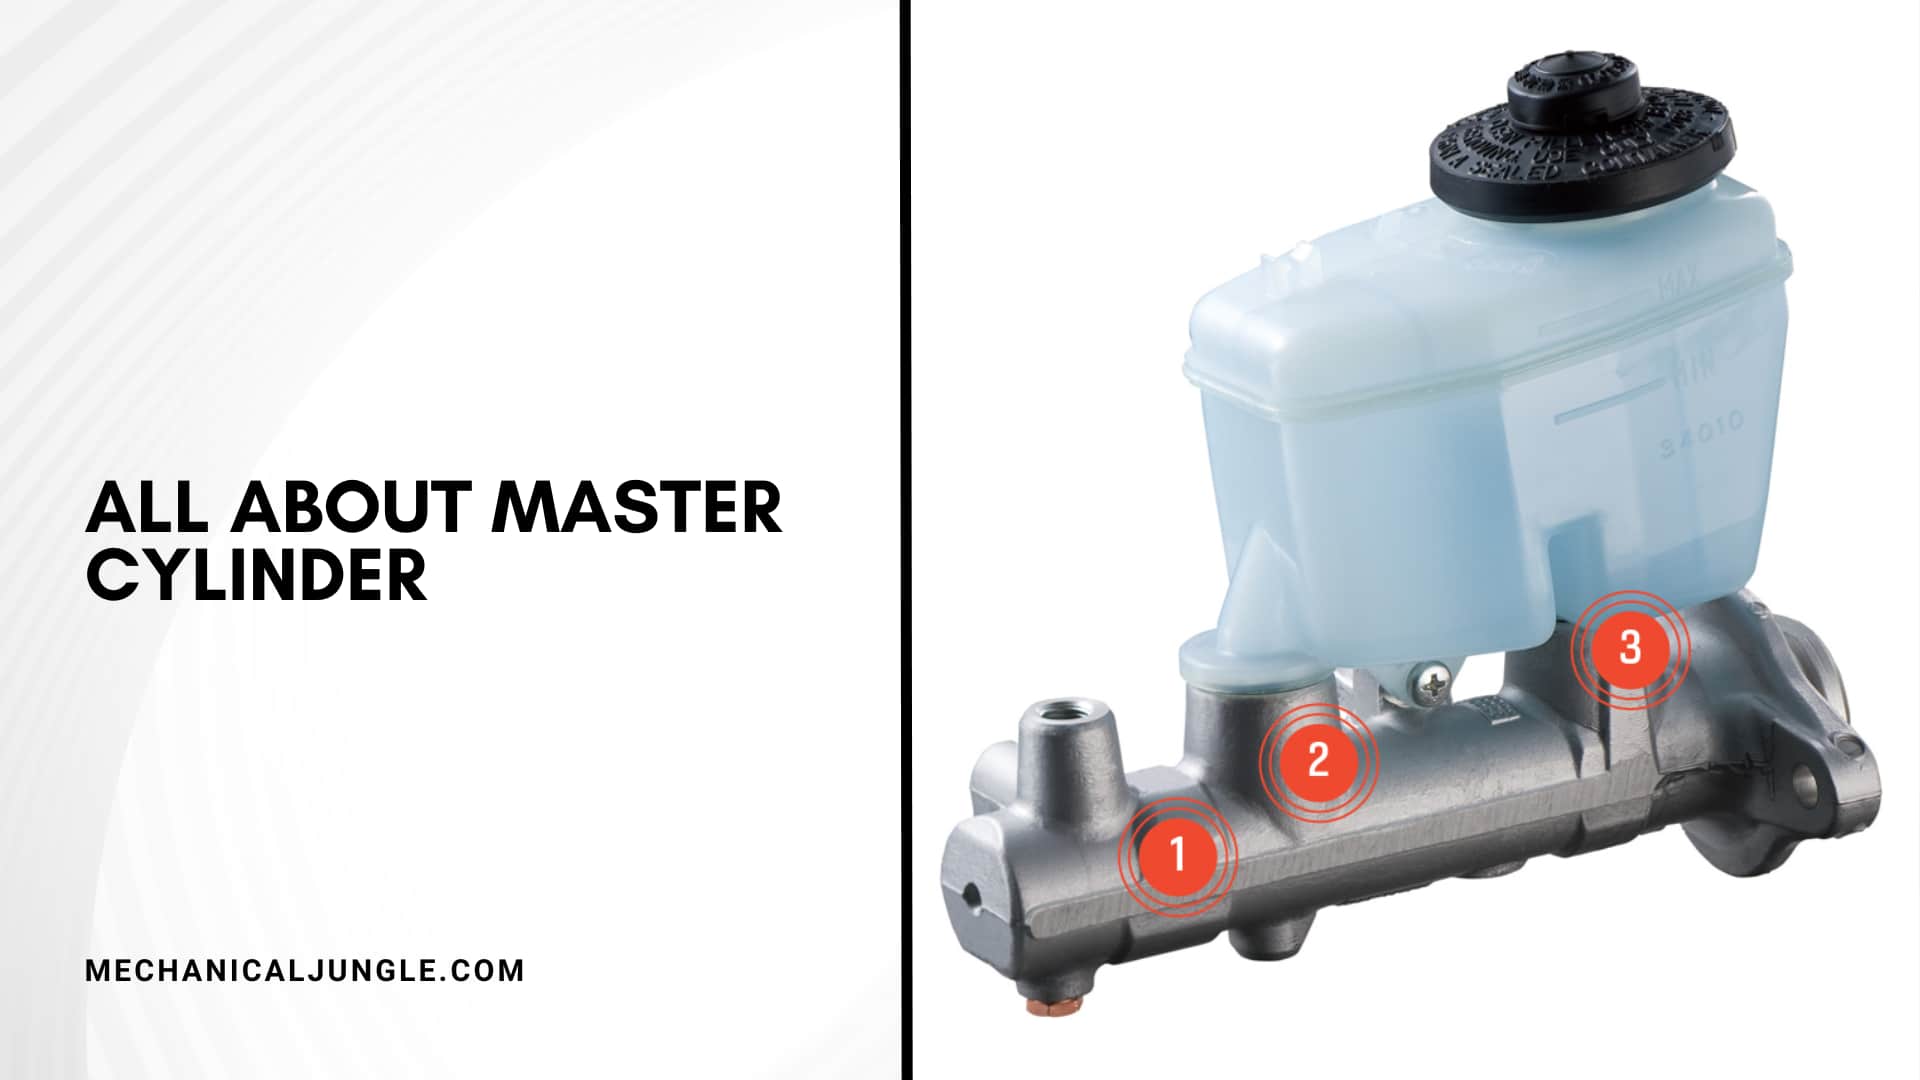 All About Master Cylinder